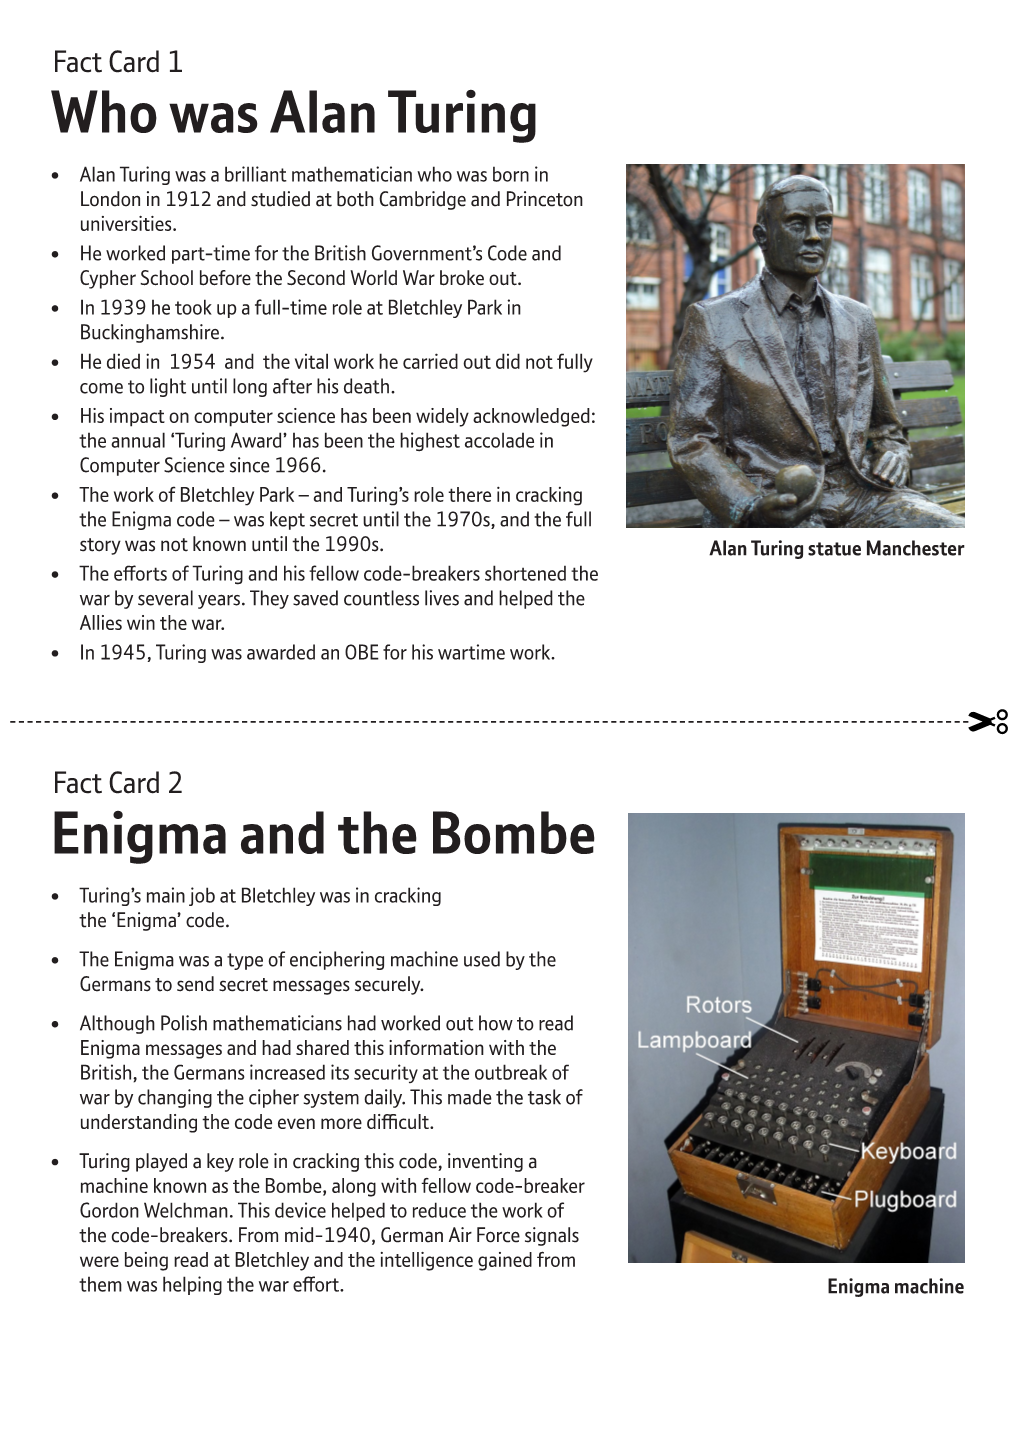 Who Was Alan Turing Enigma and the Bombe